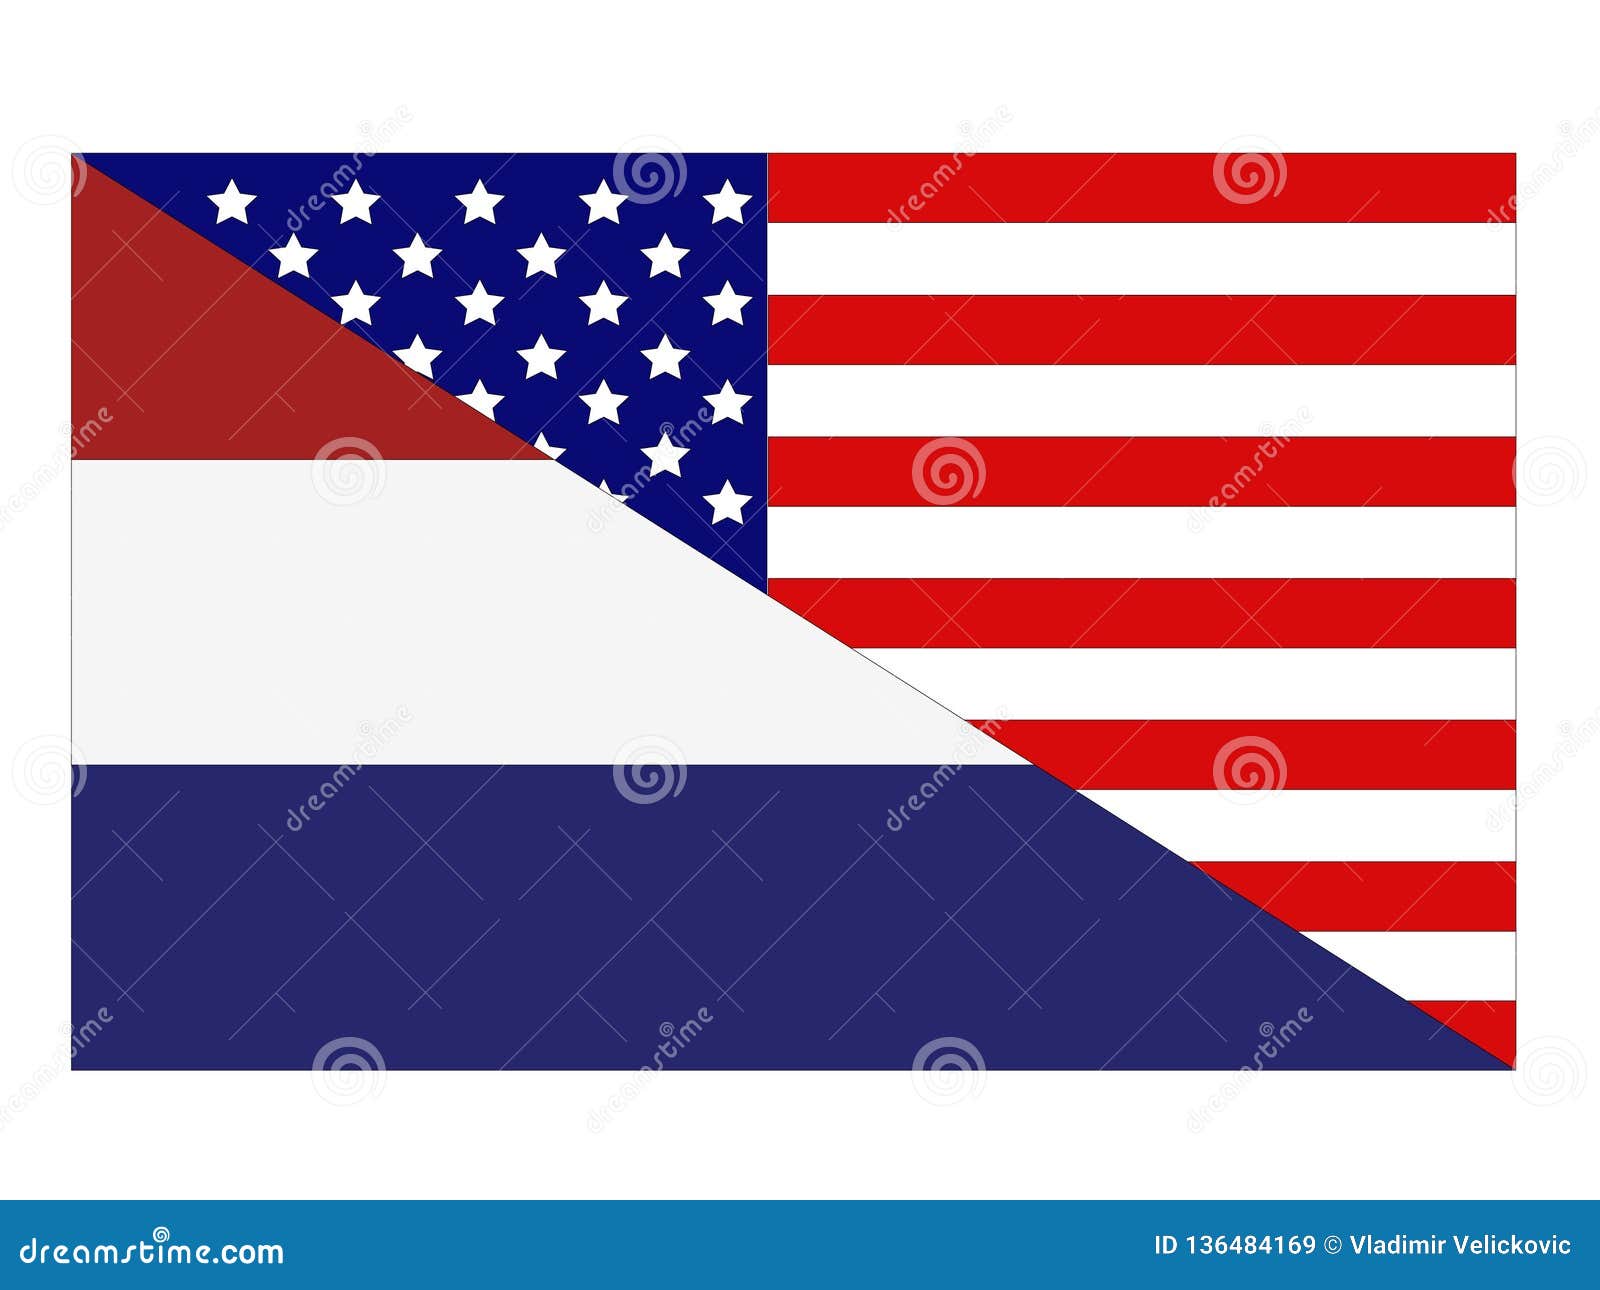 American and Dutch flags stock vector. Illustration of travel - 136484169